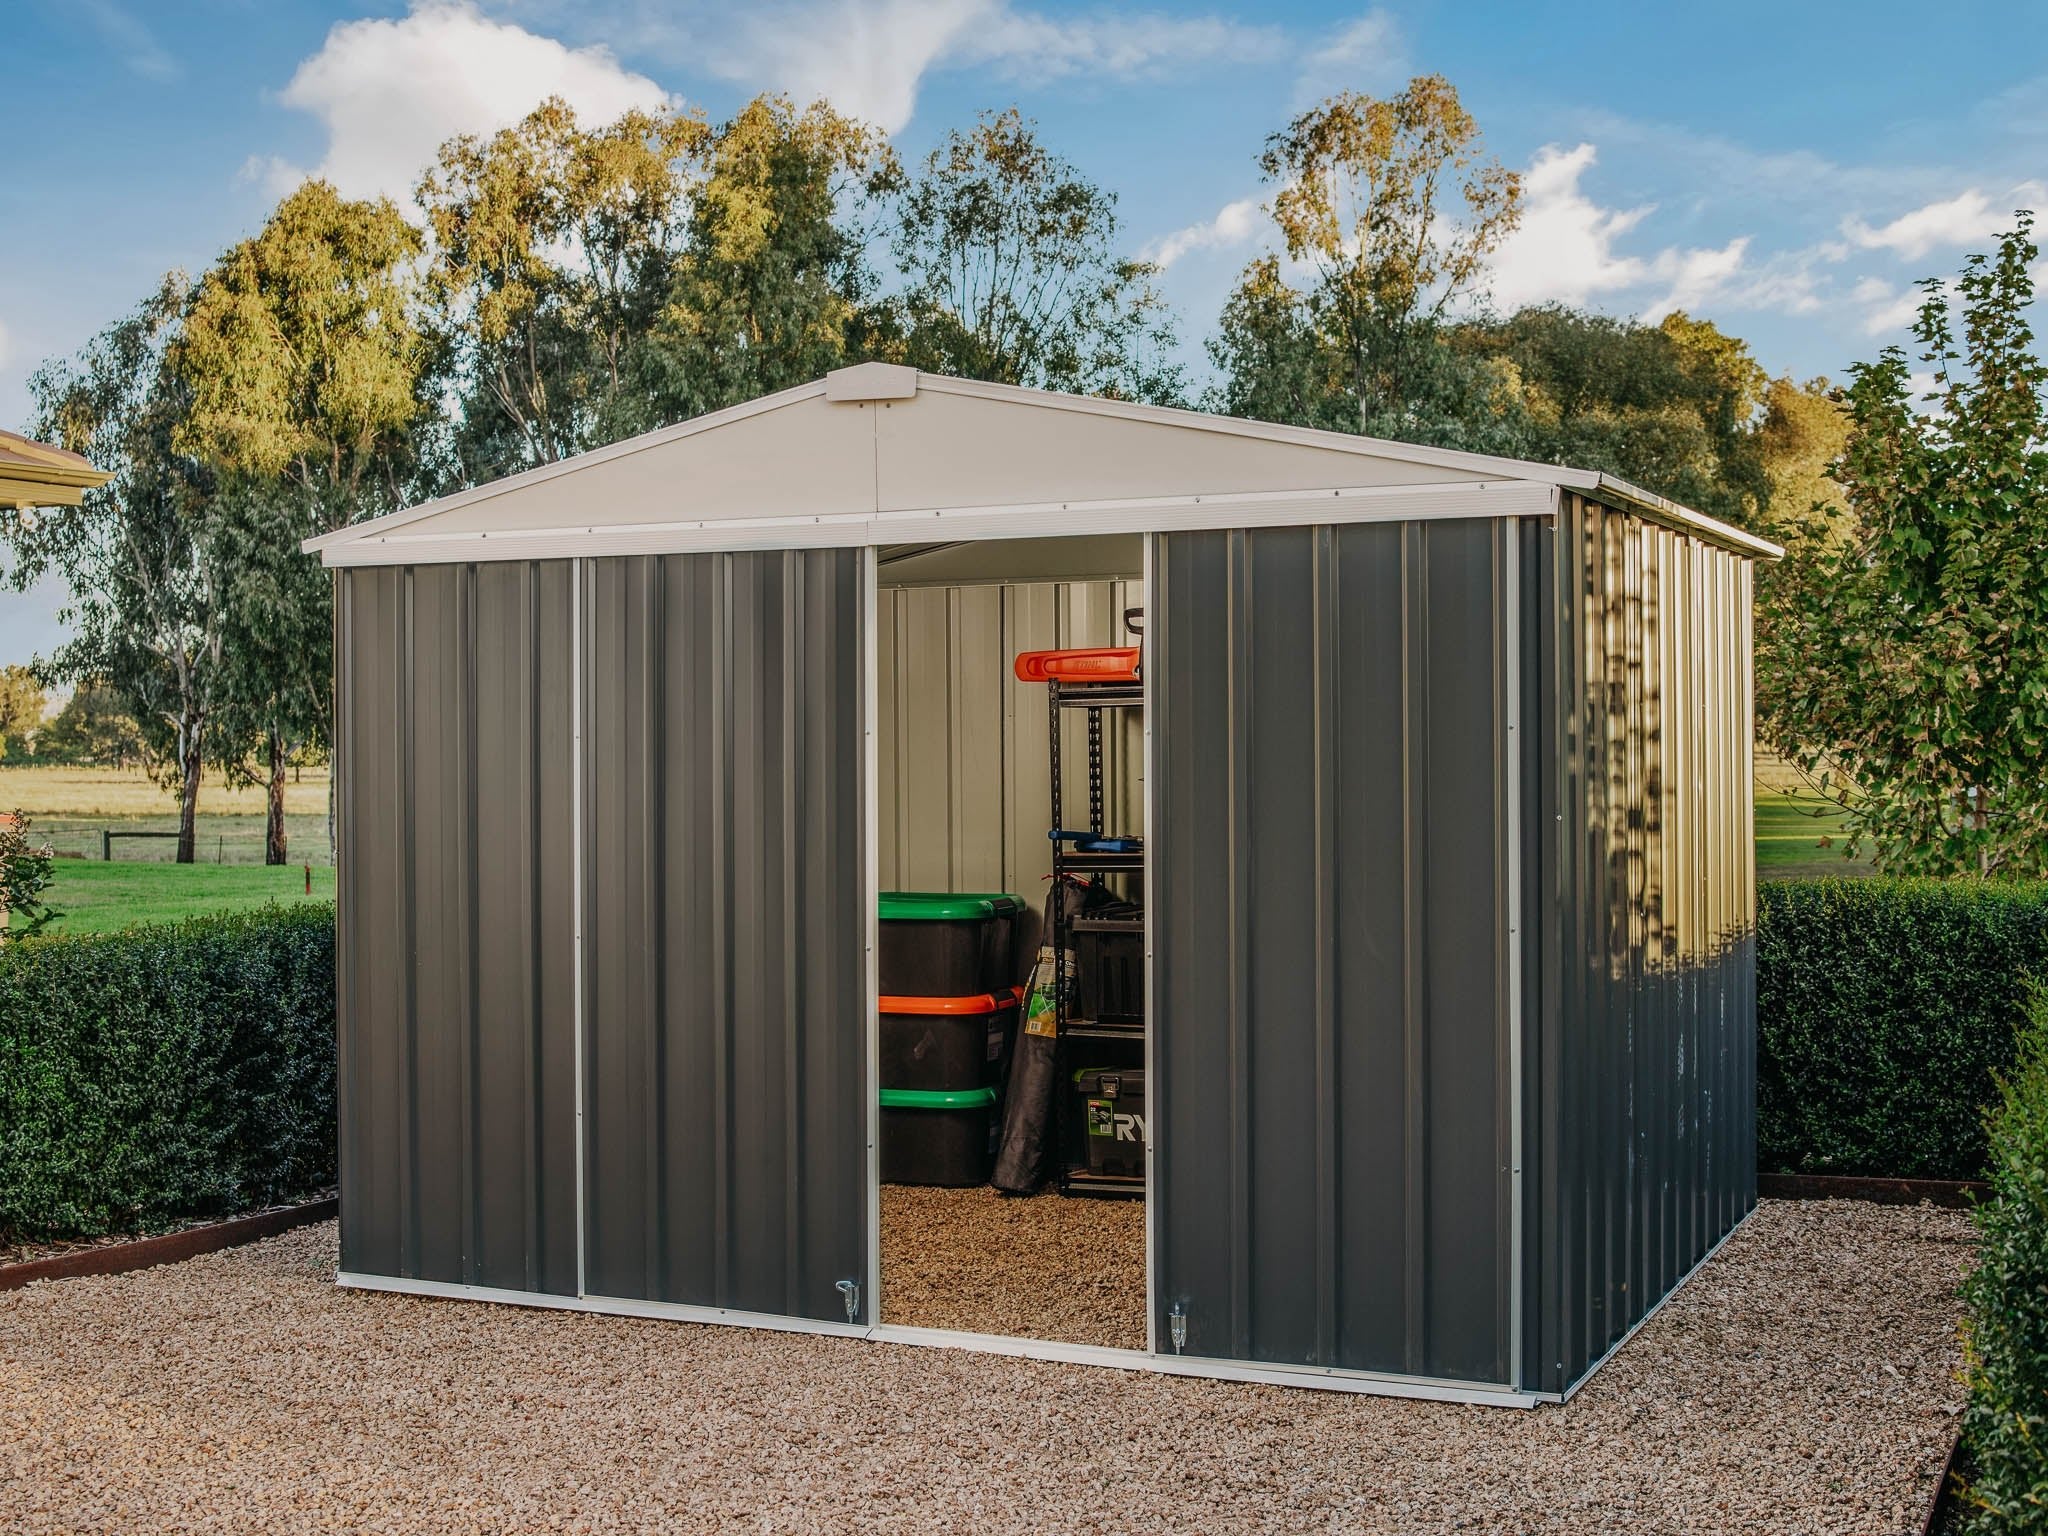 How to find the right shed for your home - EasyShed